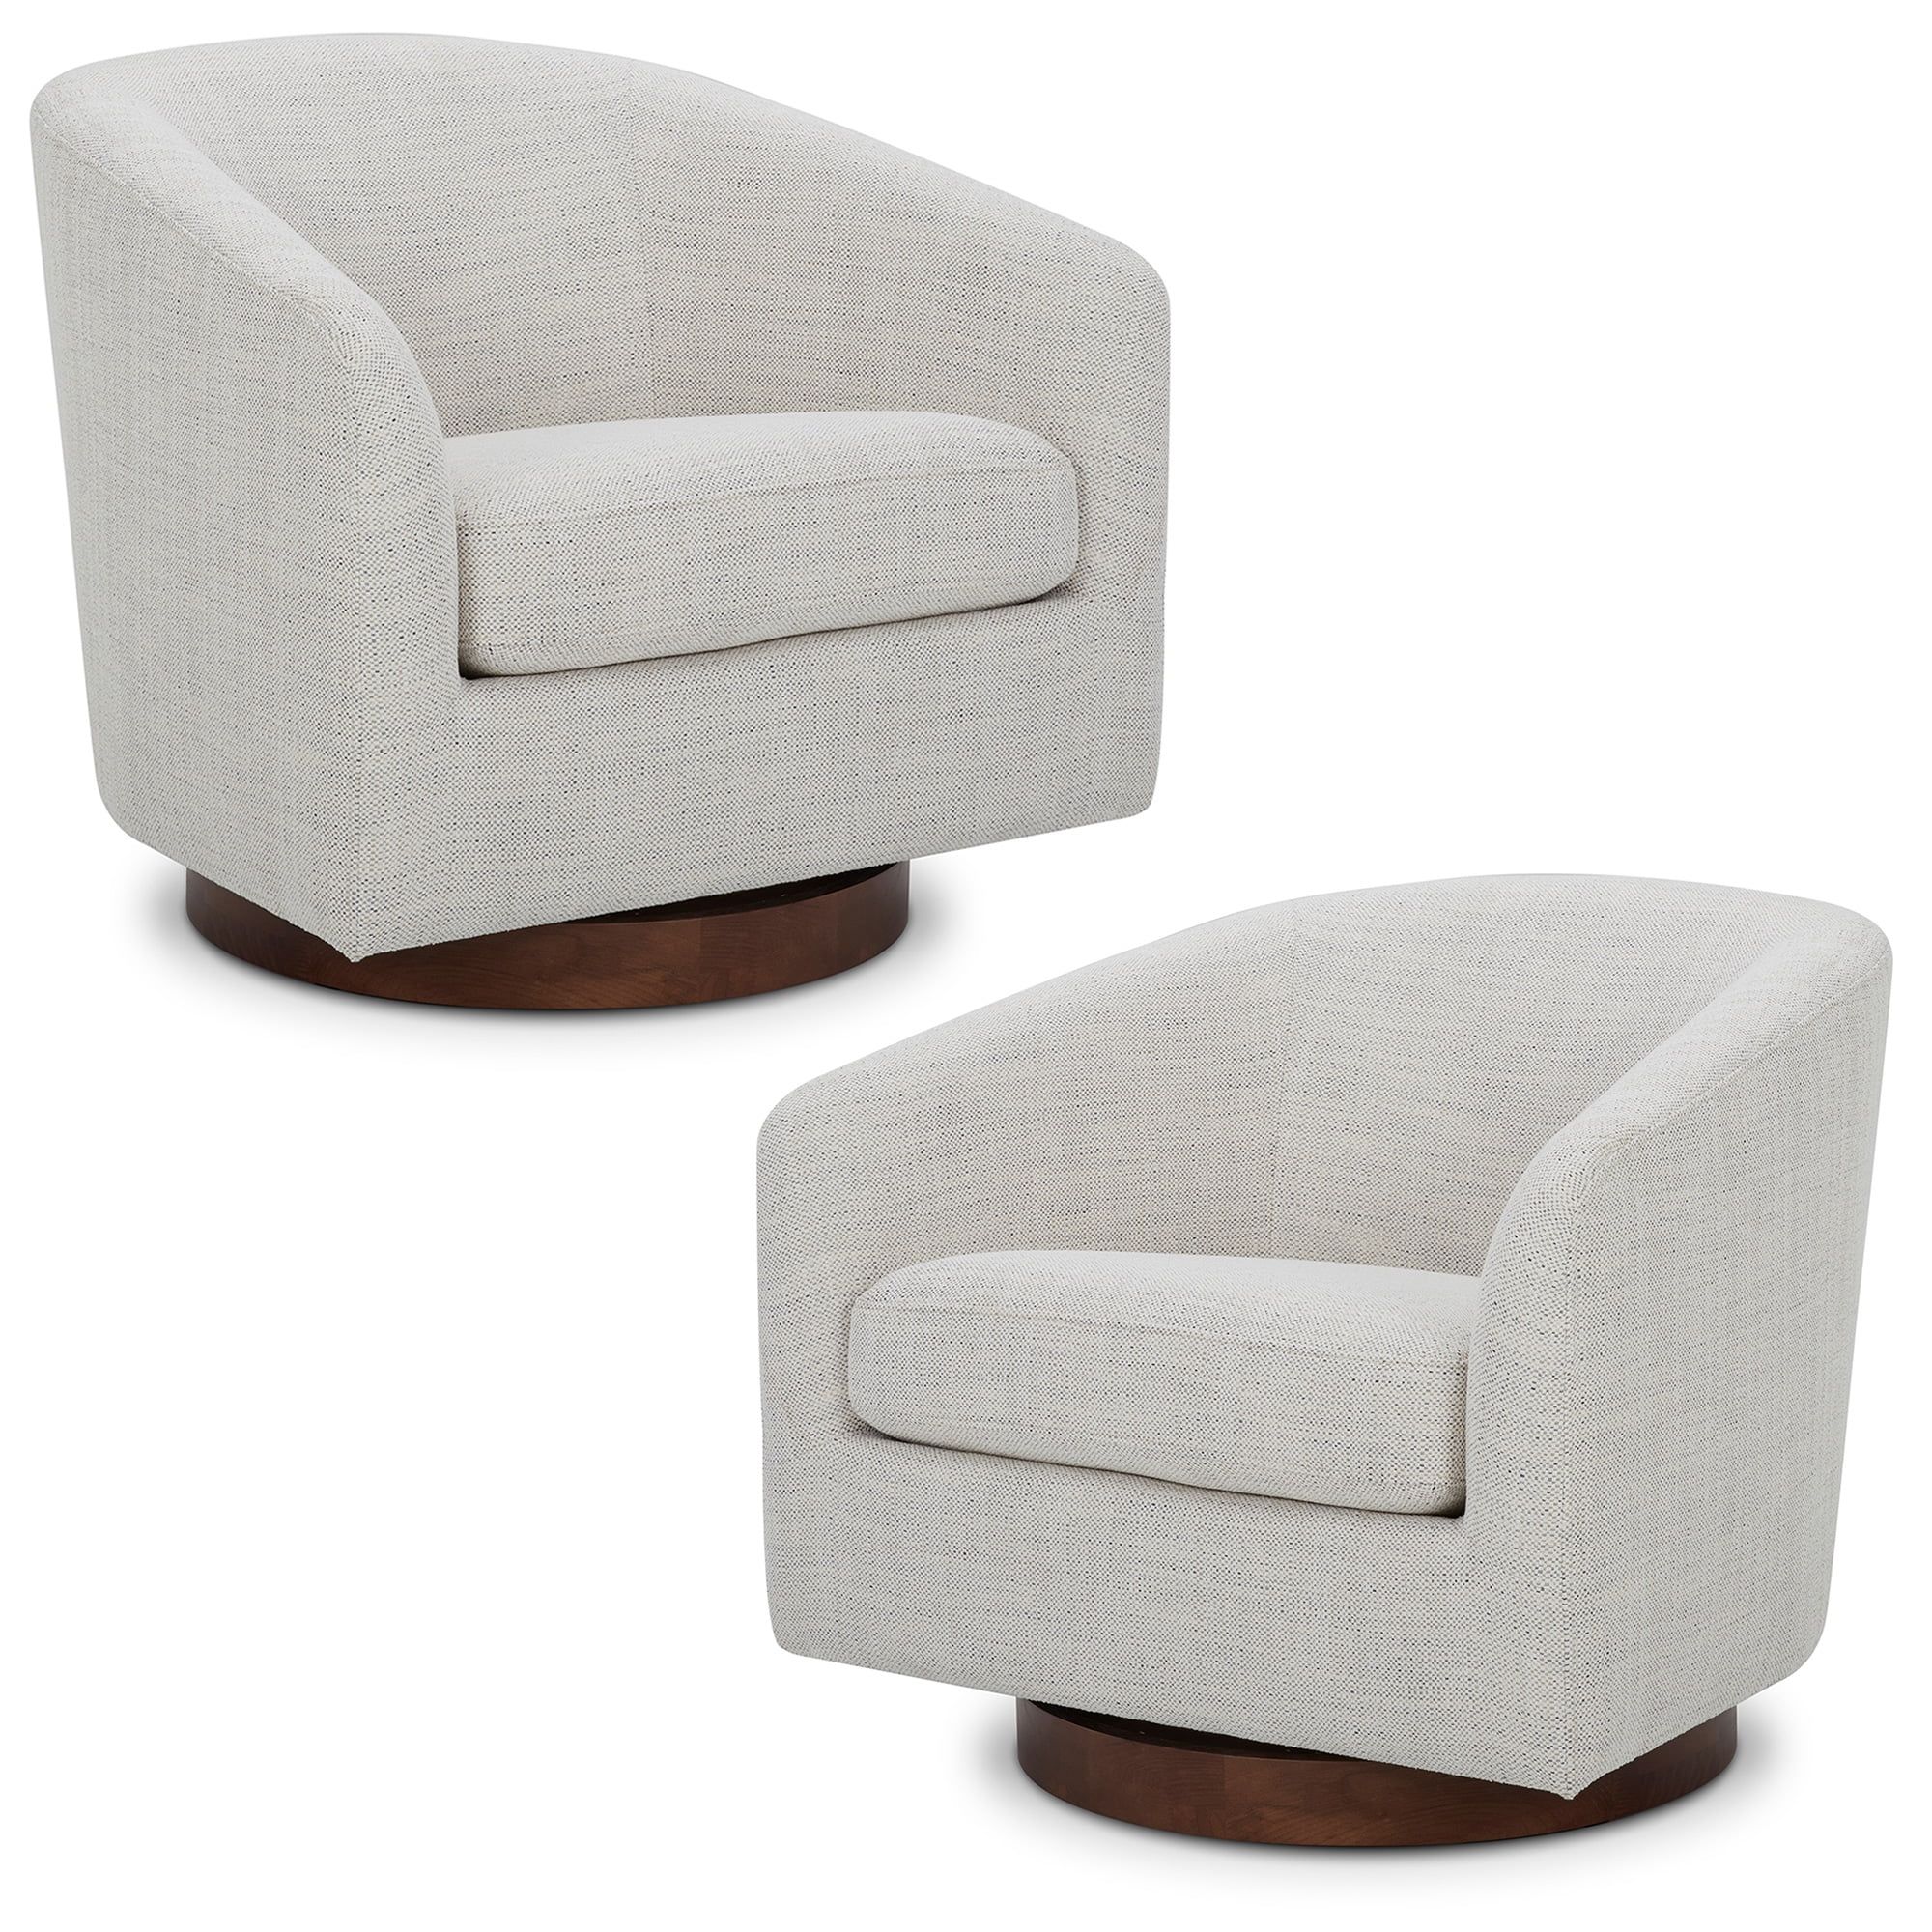 CHITA Swivel Accent Chair Set of 2, Fabric Round Barrel Arm Chair Living Room, Ivory White | Walmart (US)